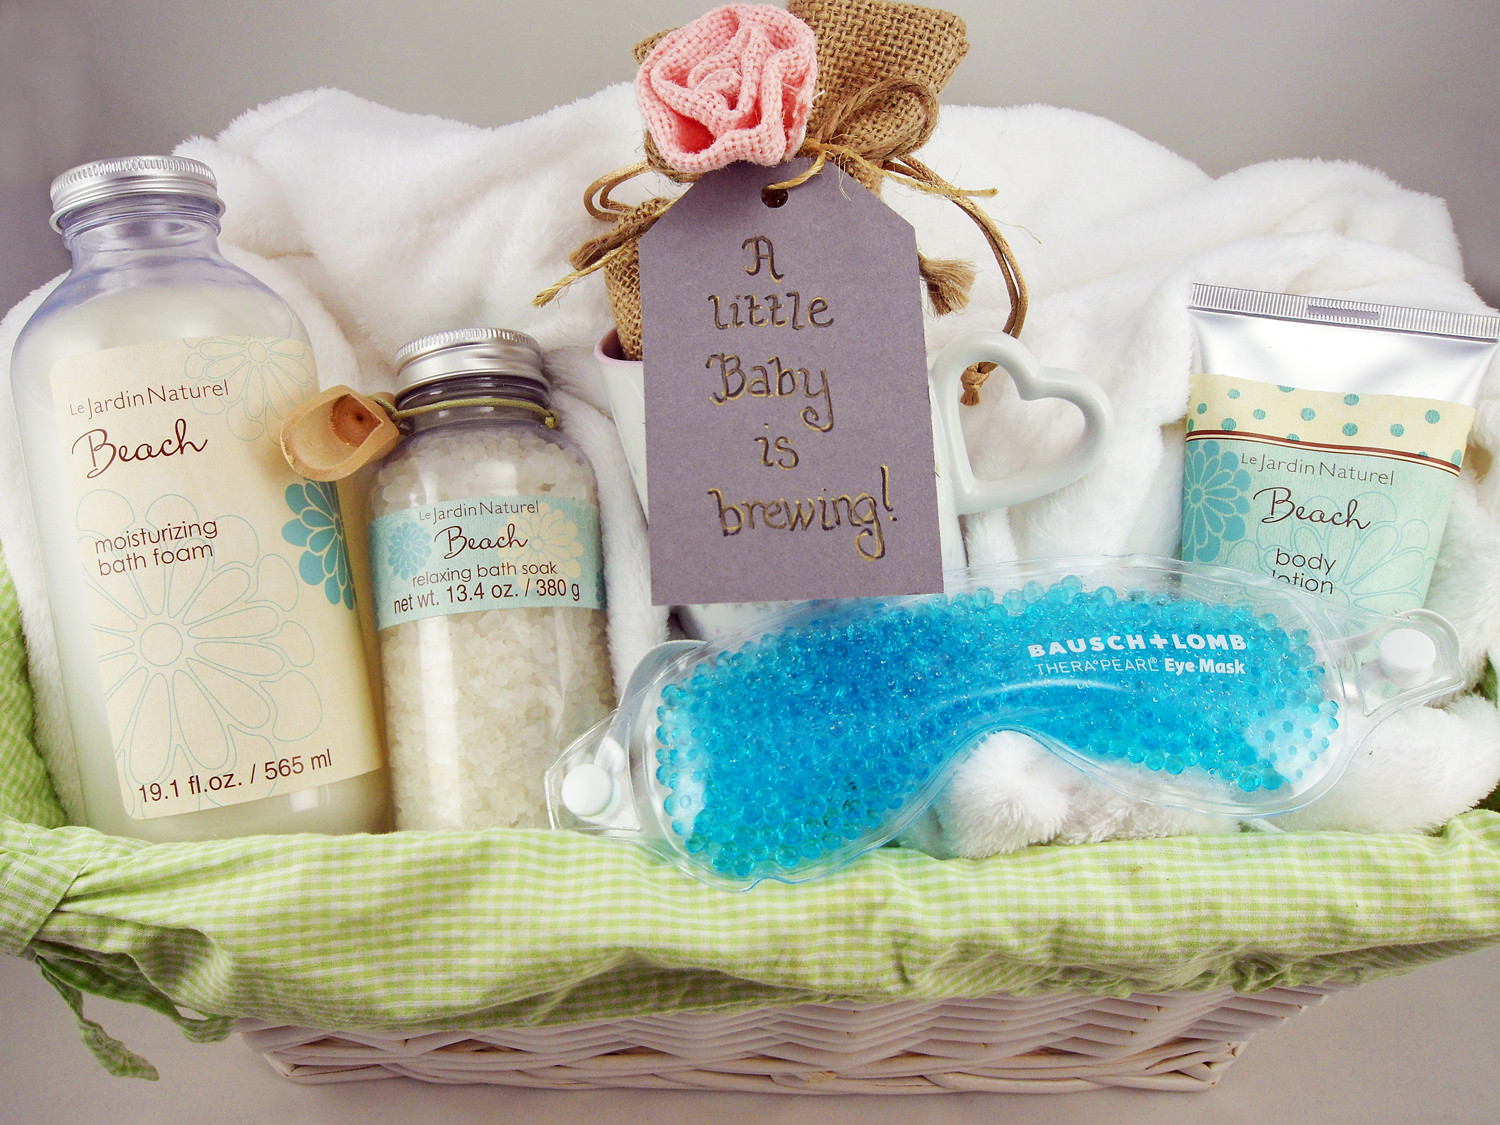 Awesome Baby Gift Ideas
 Expecting Couples Love These Unique Personalized Baby Gifts